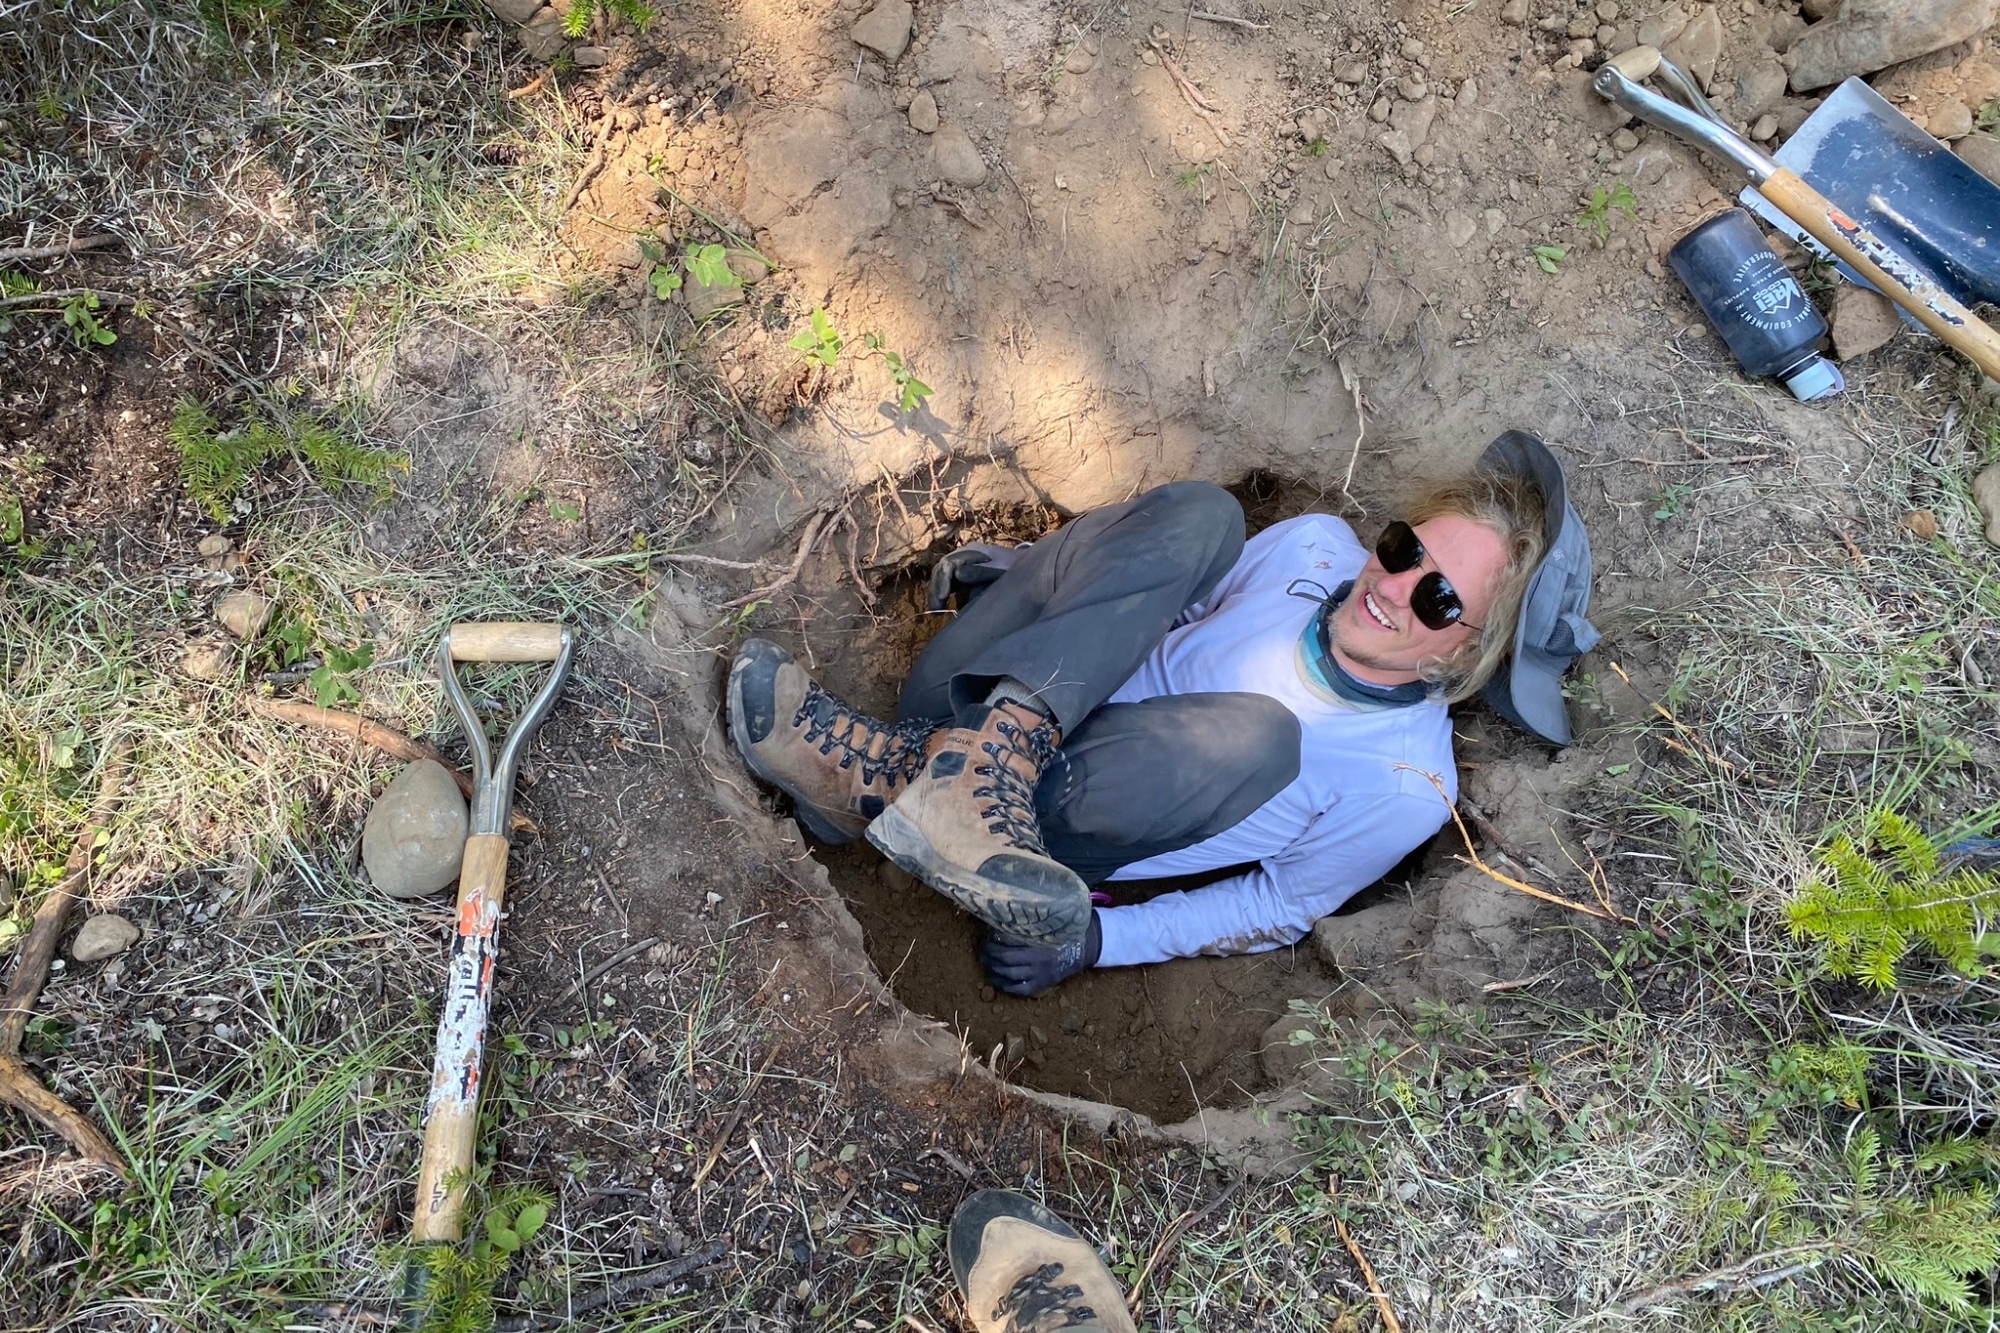 Matthew smiling in a hole in the ground next to a shovel